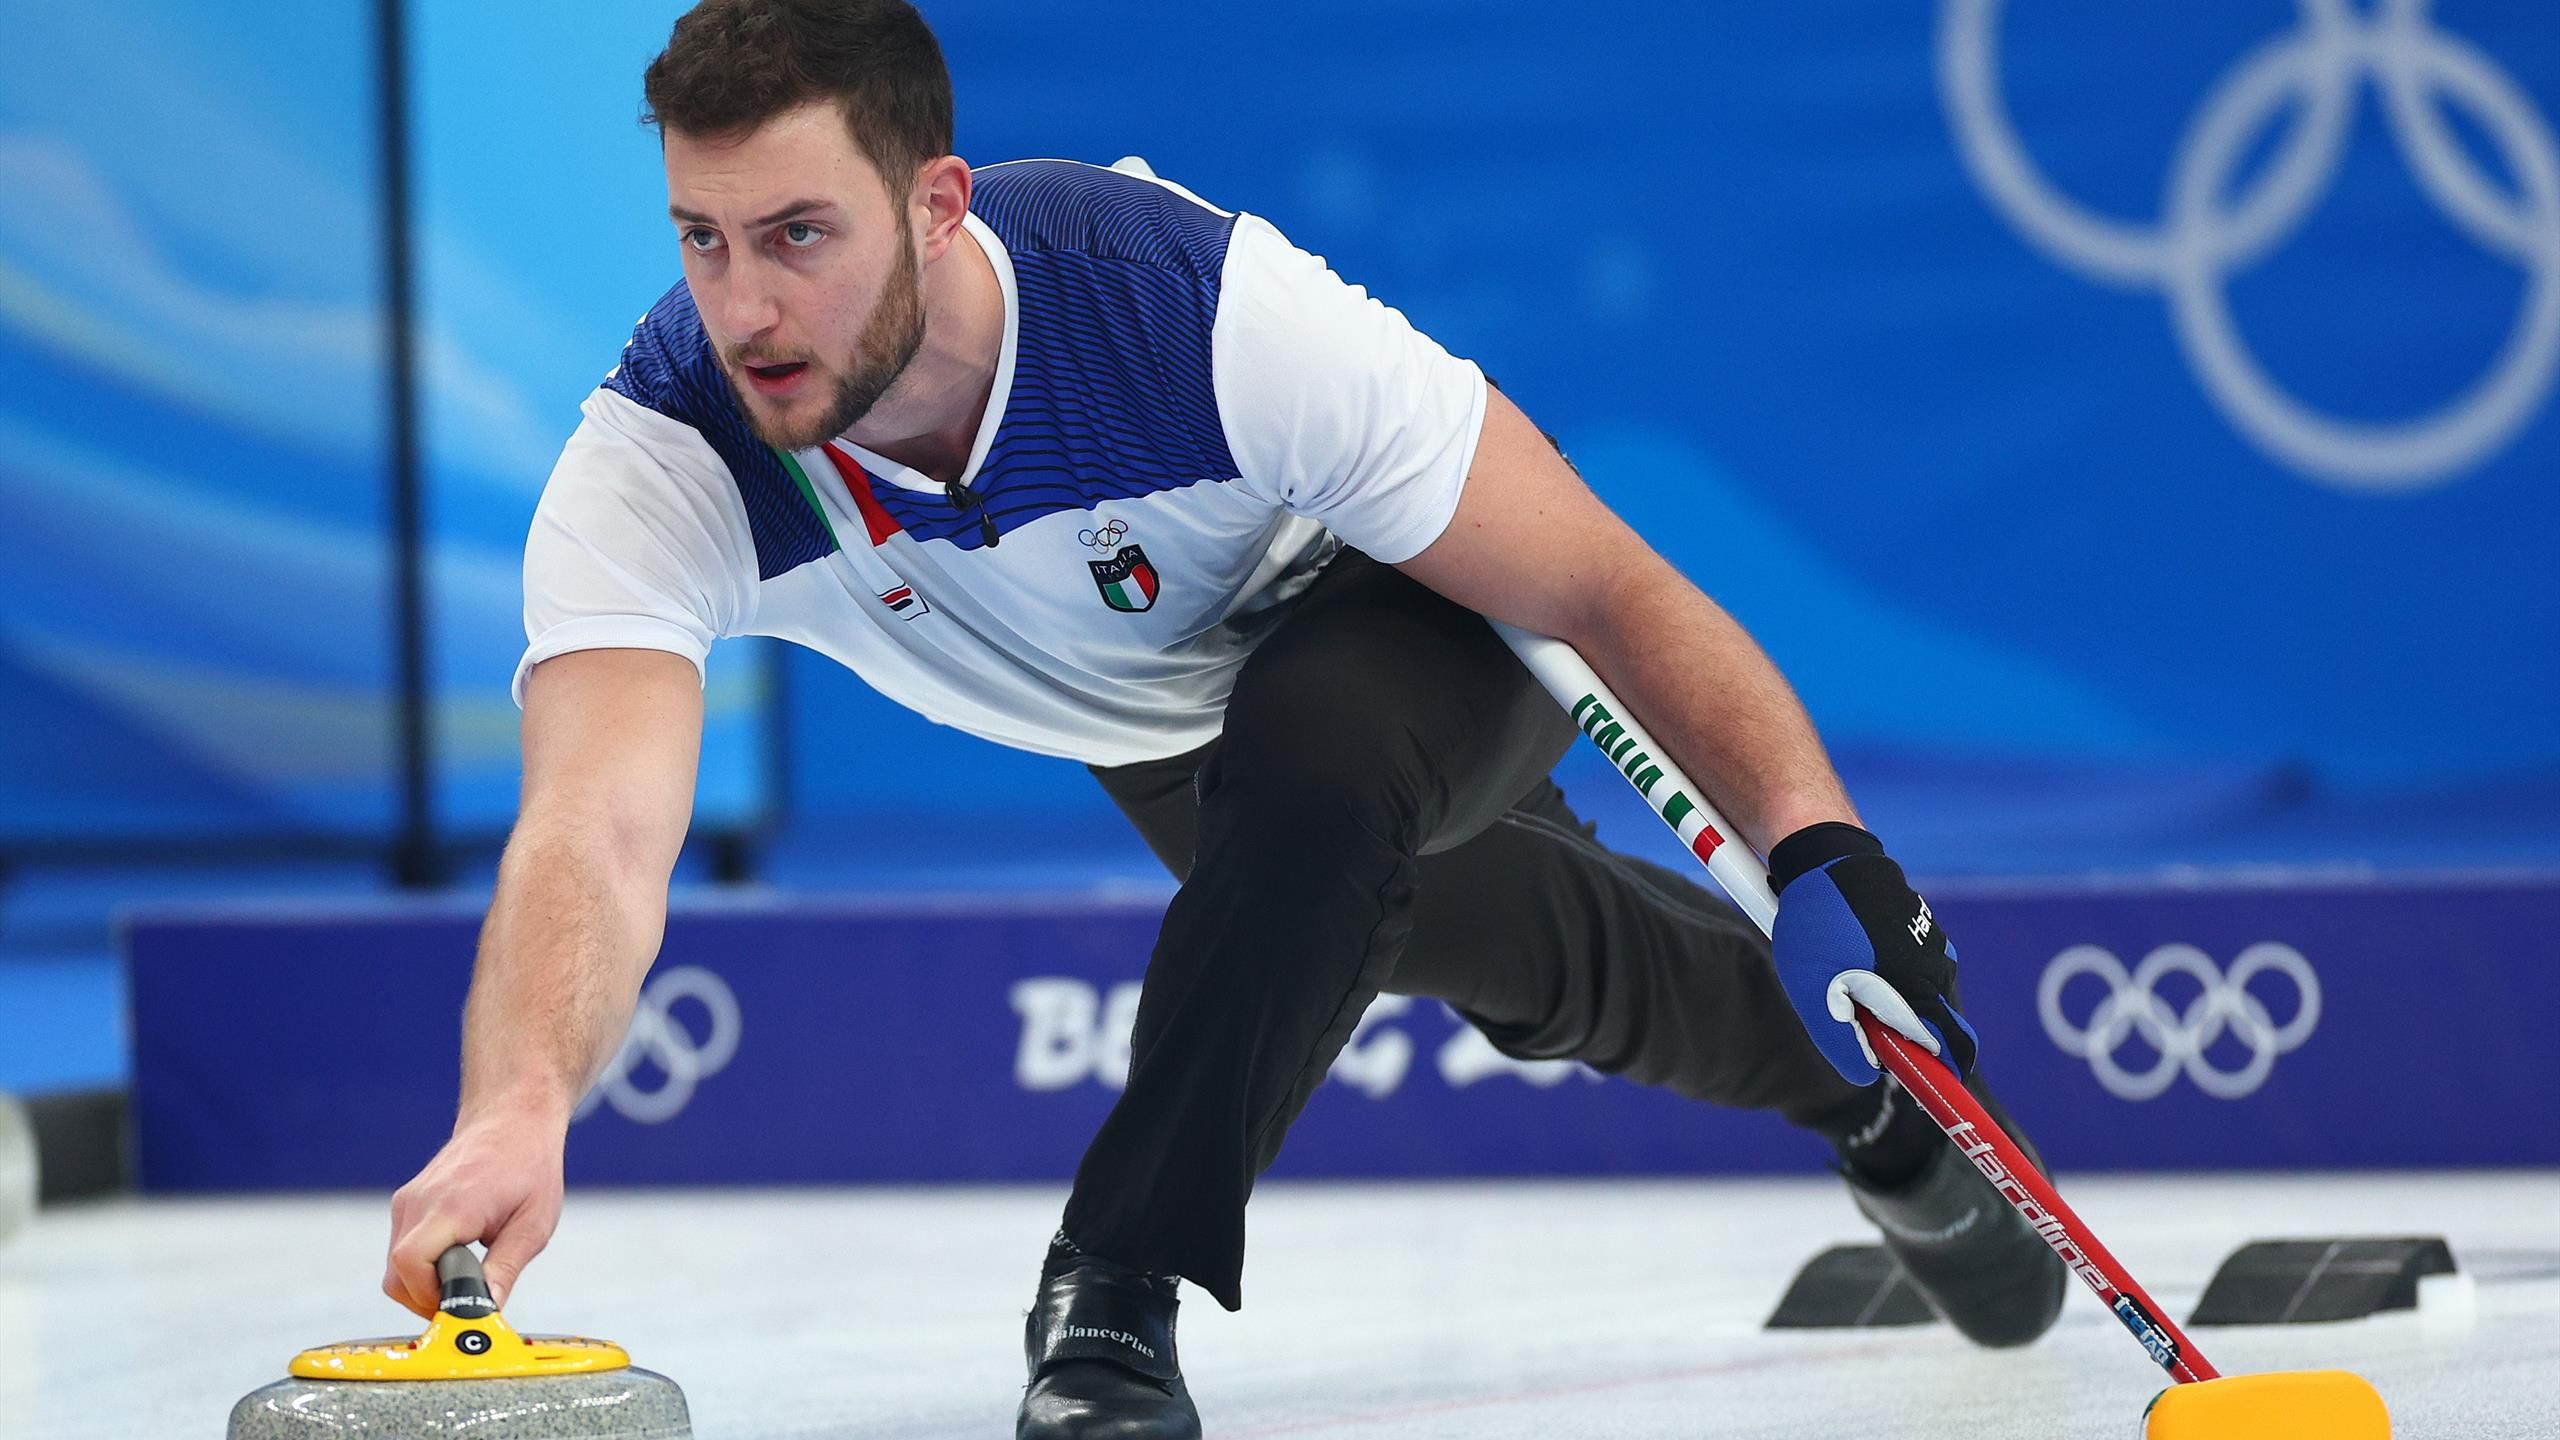 curling at the 2022 winter olympics